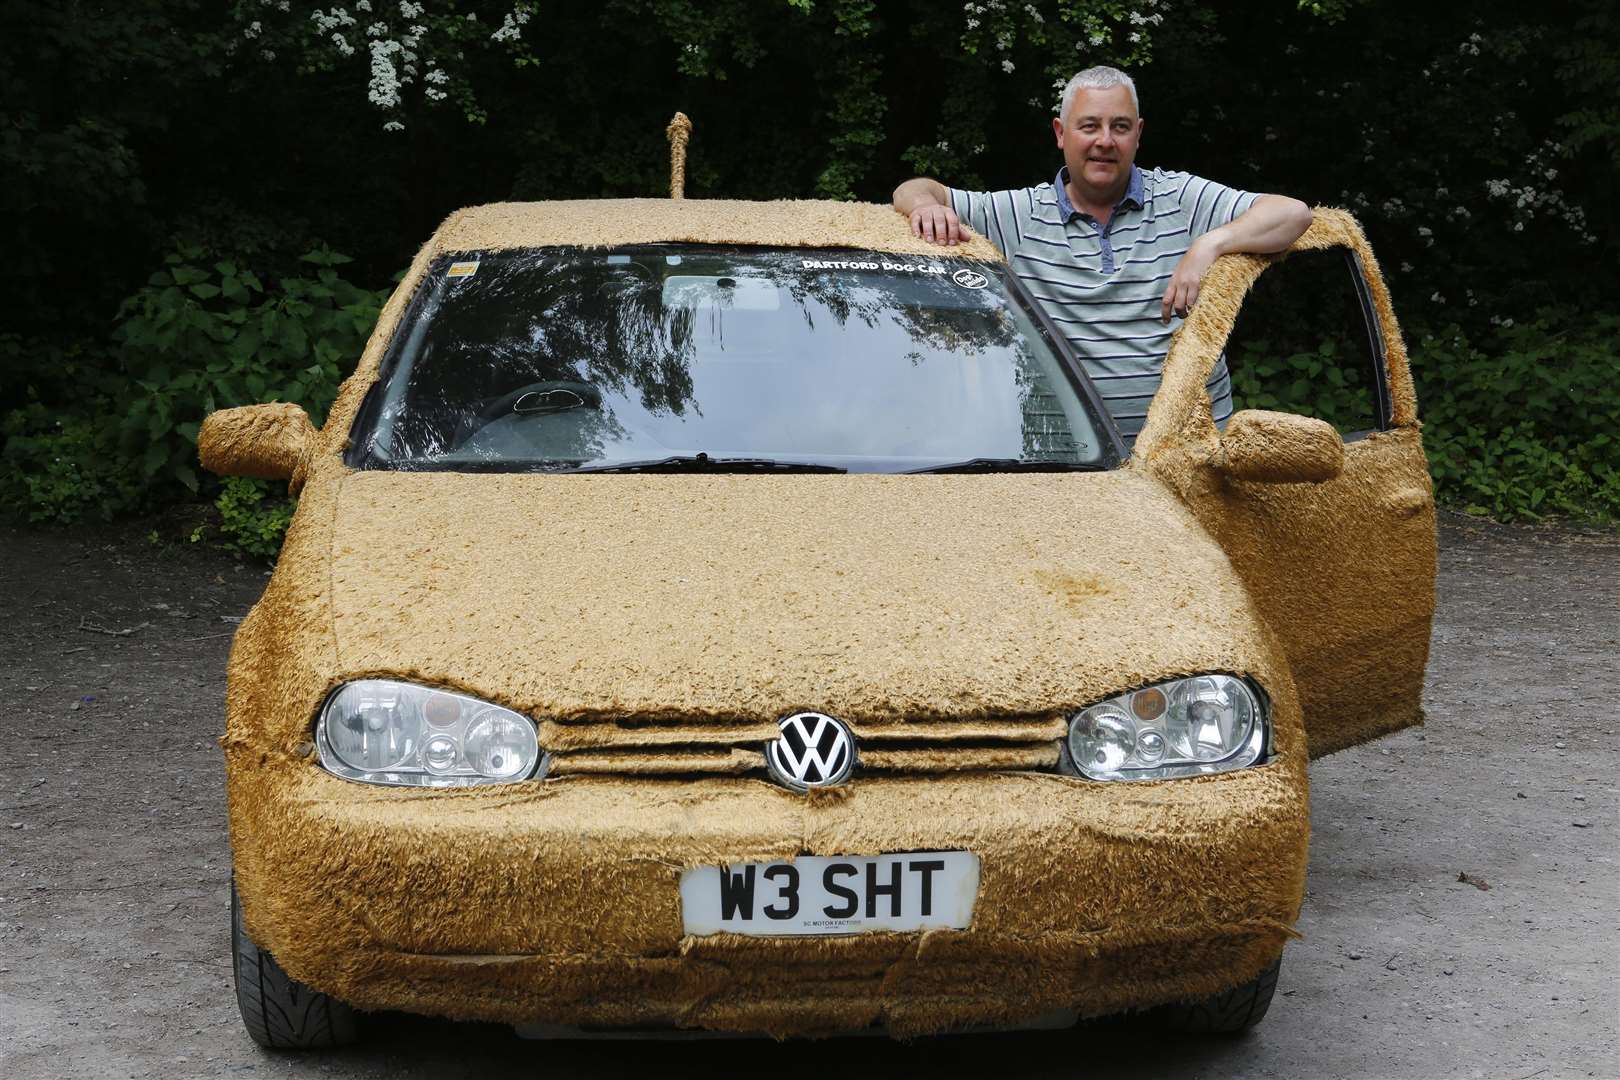 Justin Scrutton has decorated his car with fur to make it into the perfect vehicle to transport his dogs